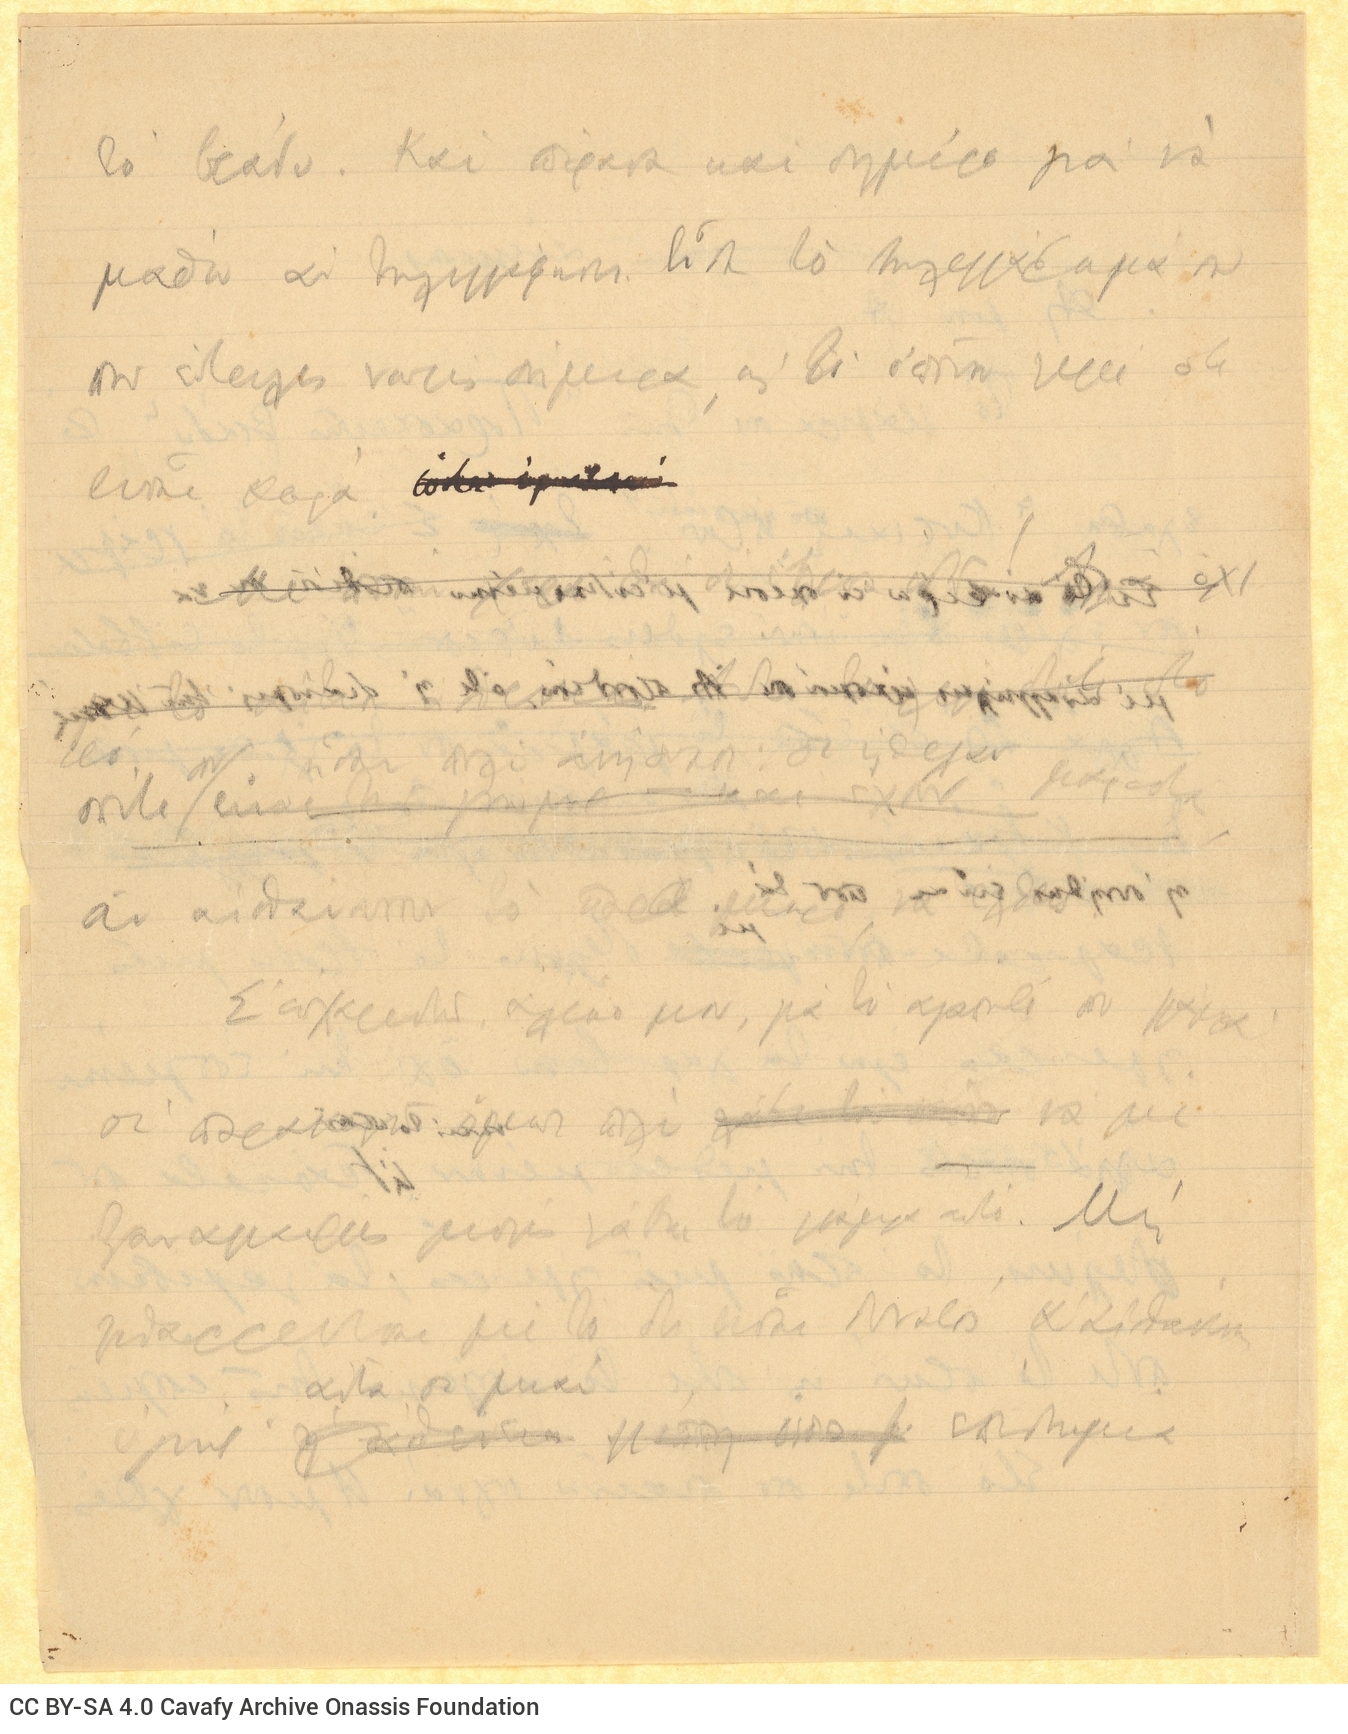 Handwritten draft letter by Cavafy to Alekos [Singopoulo] in a double sheet notepaper. Description of the mail delivery by th